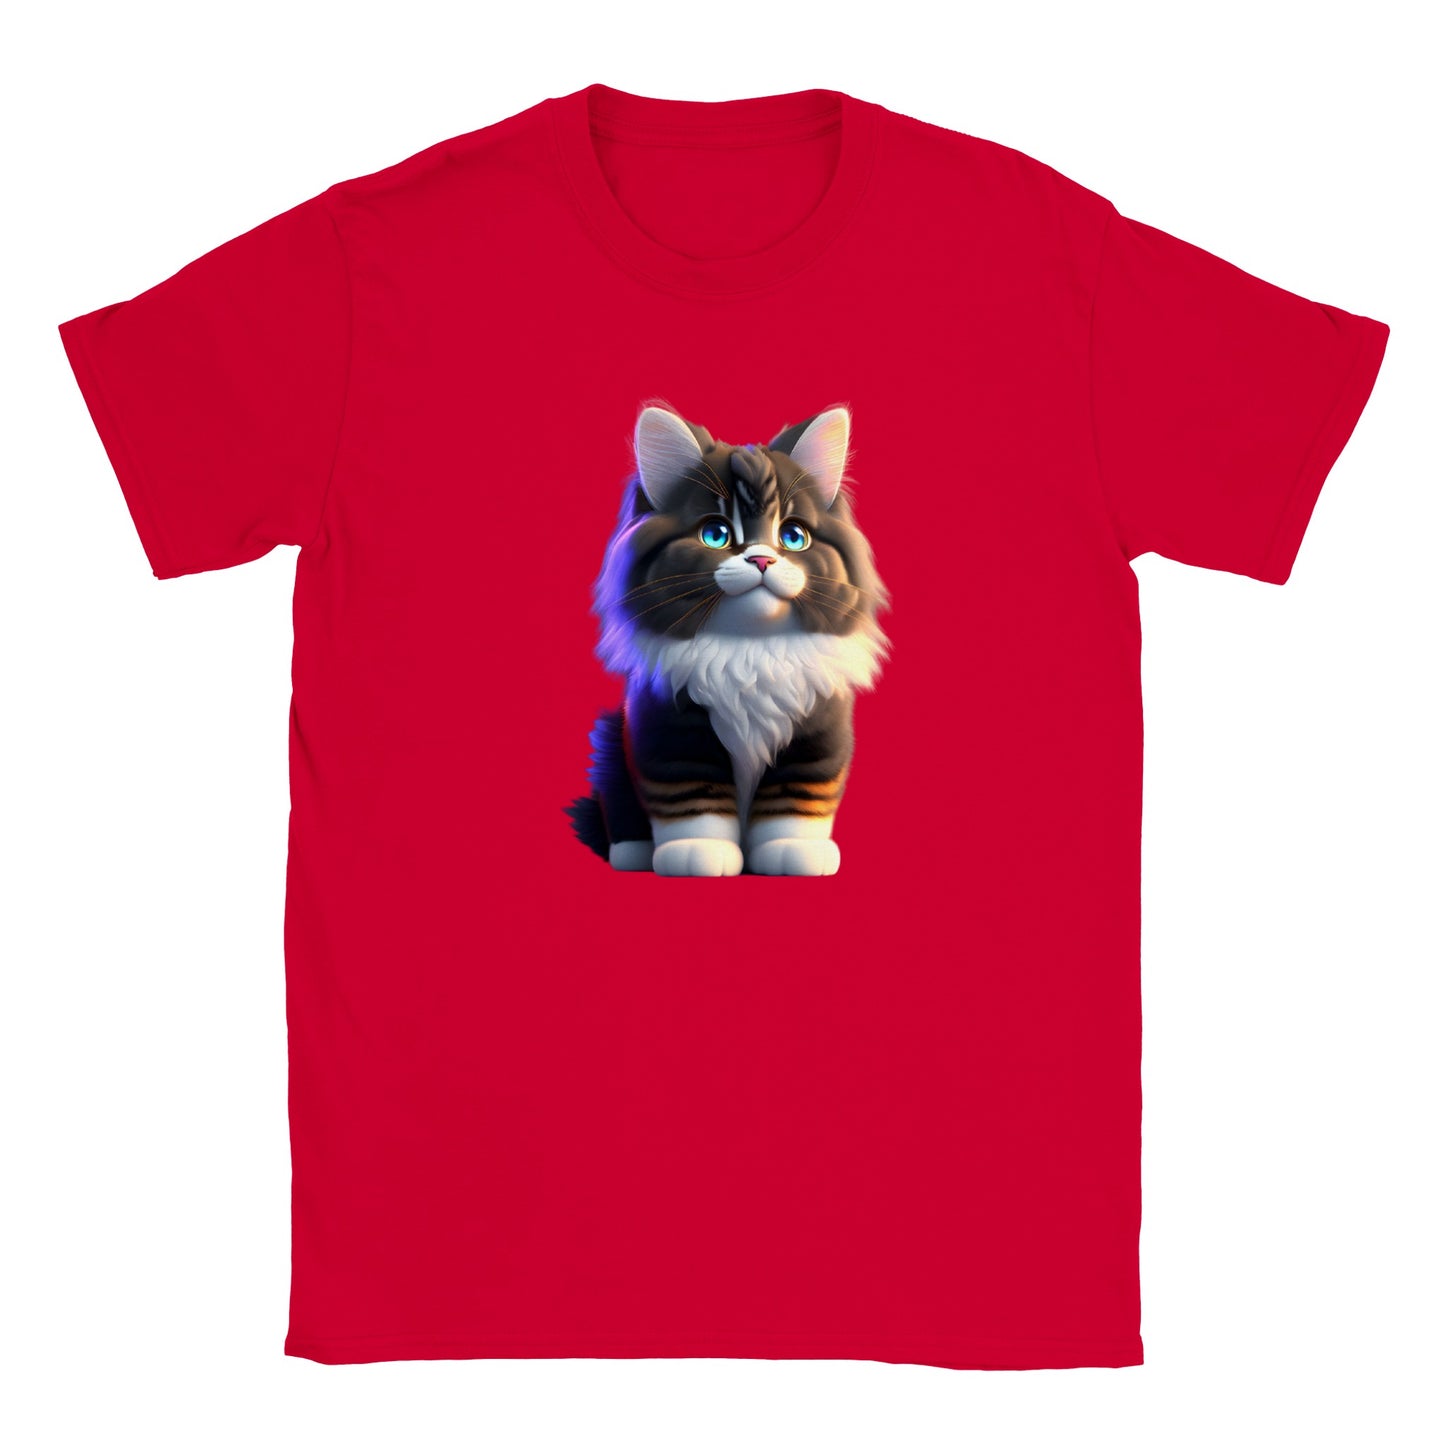 Adorable, Cool, Cute Cats and Kittens Toy - Classic Kids Crewneck T-Shirt 7